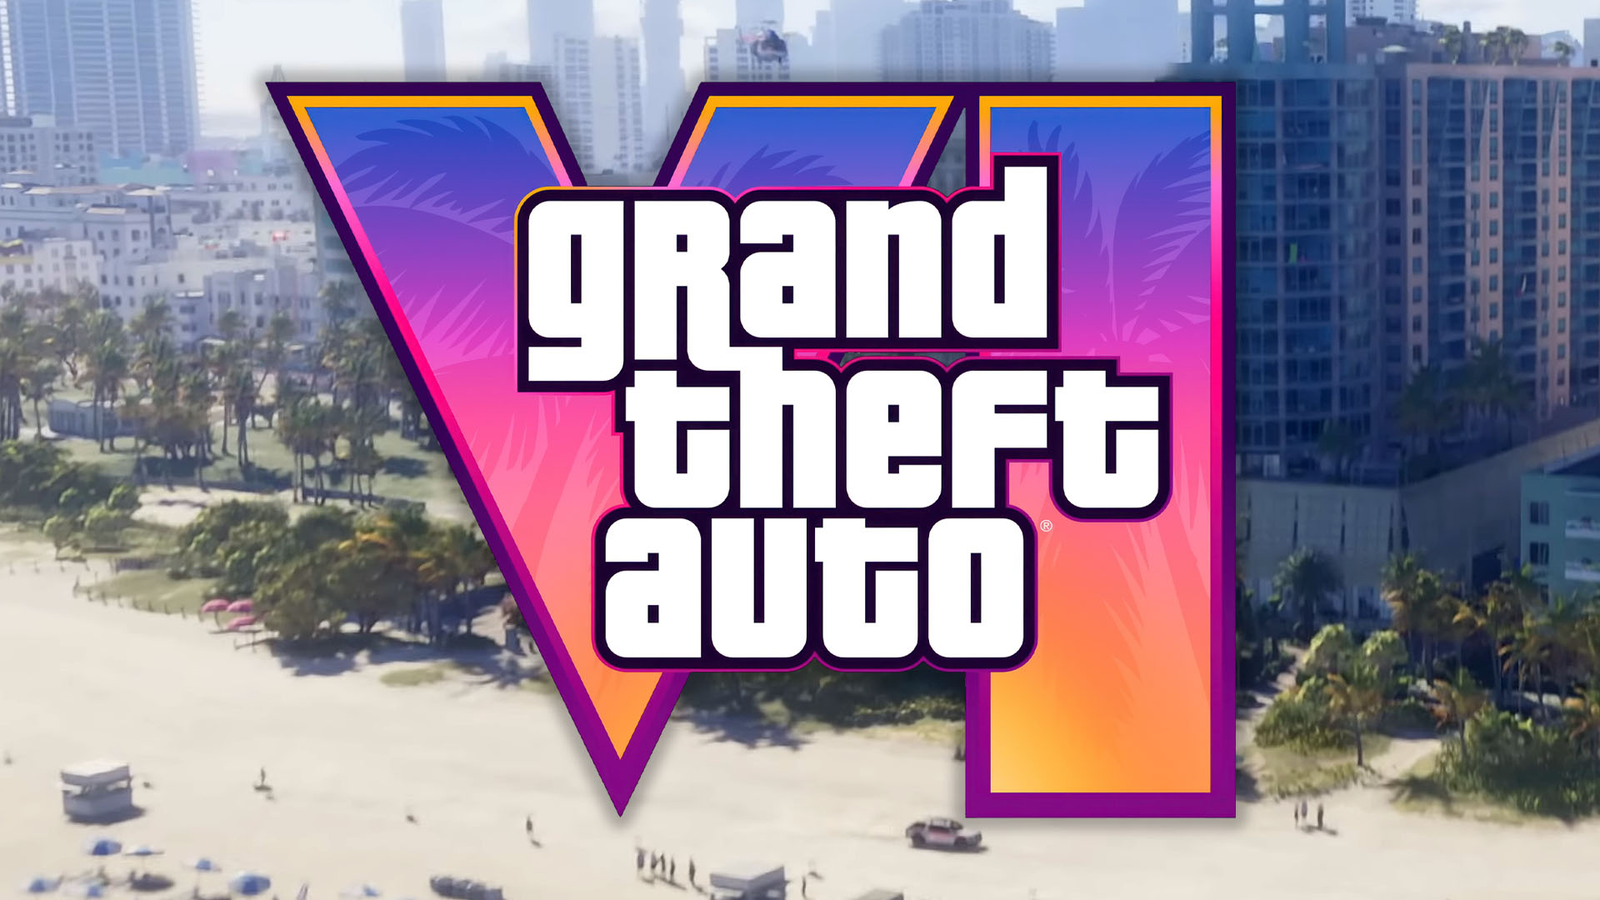 Grand Theft Auto trailer 'is on track' to be the most watched